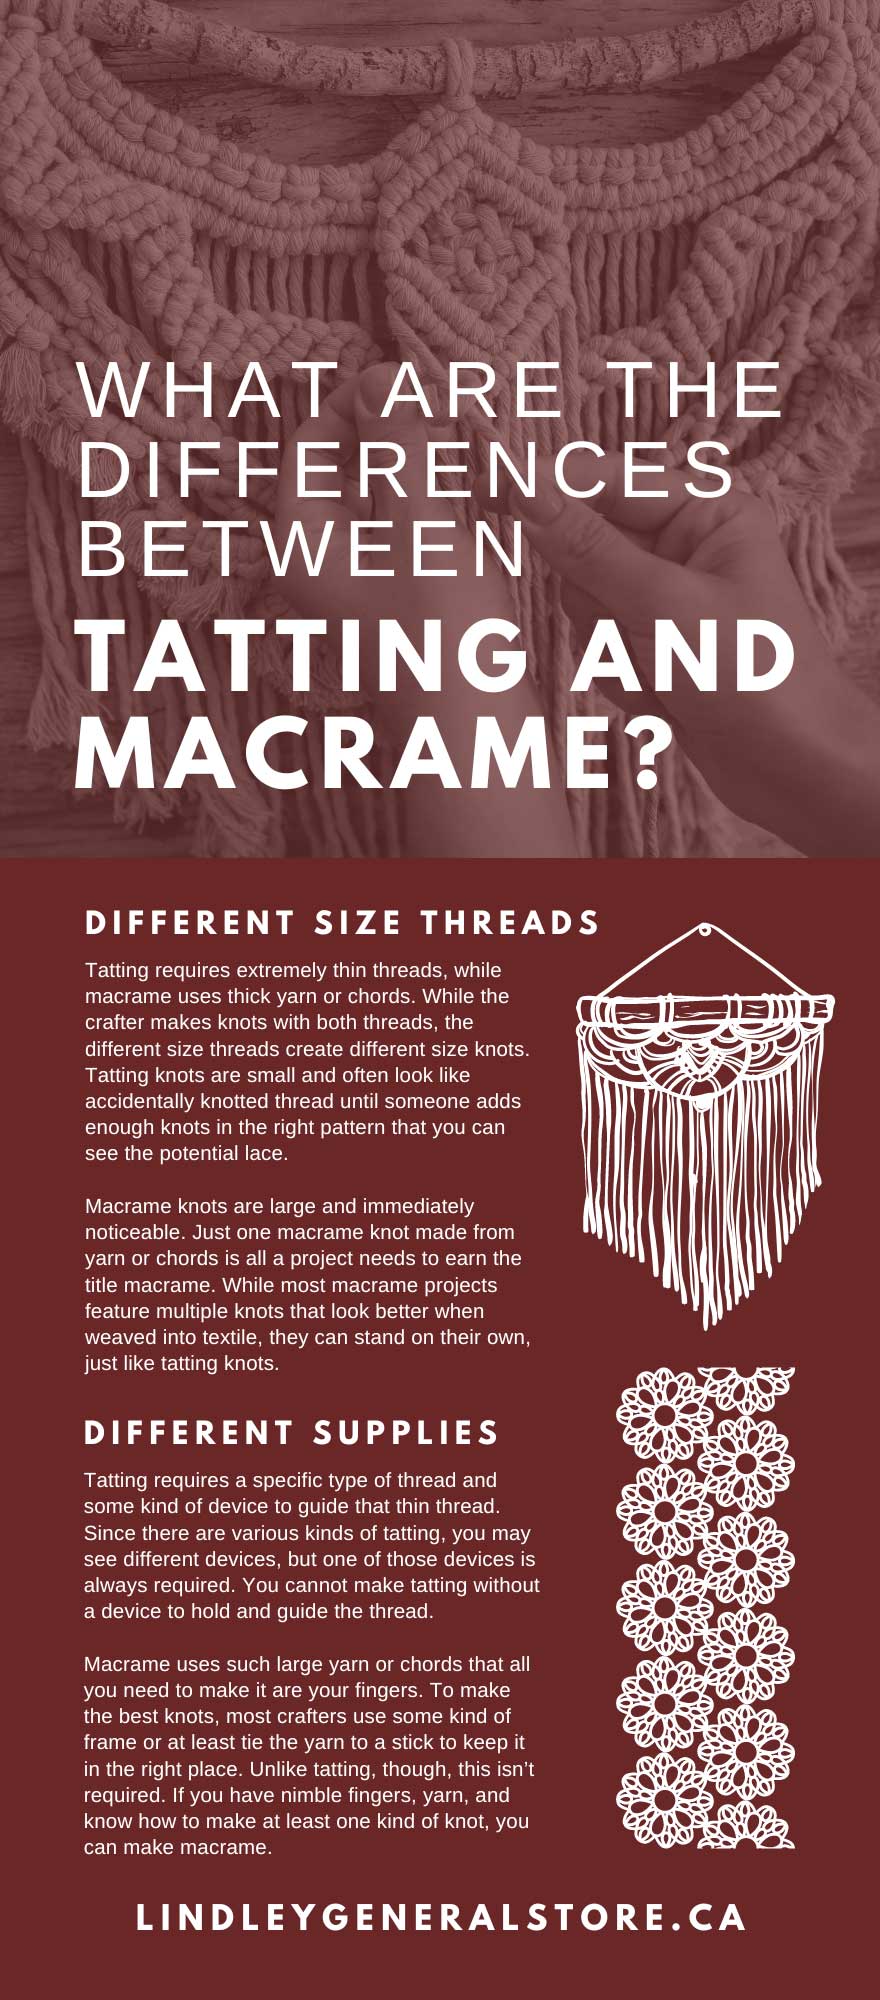 What Are the Differences Between Tatting and Macrame?